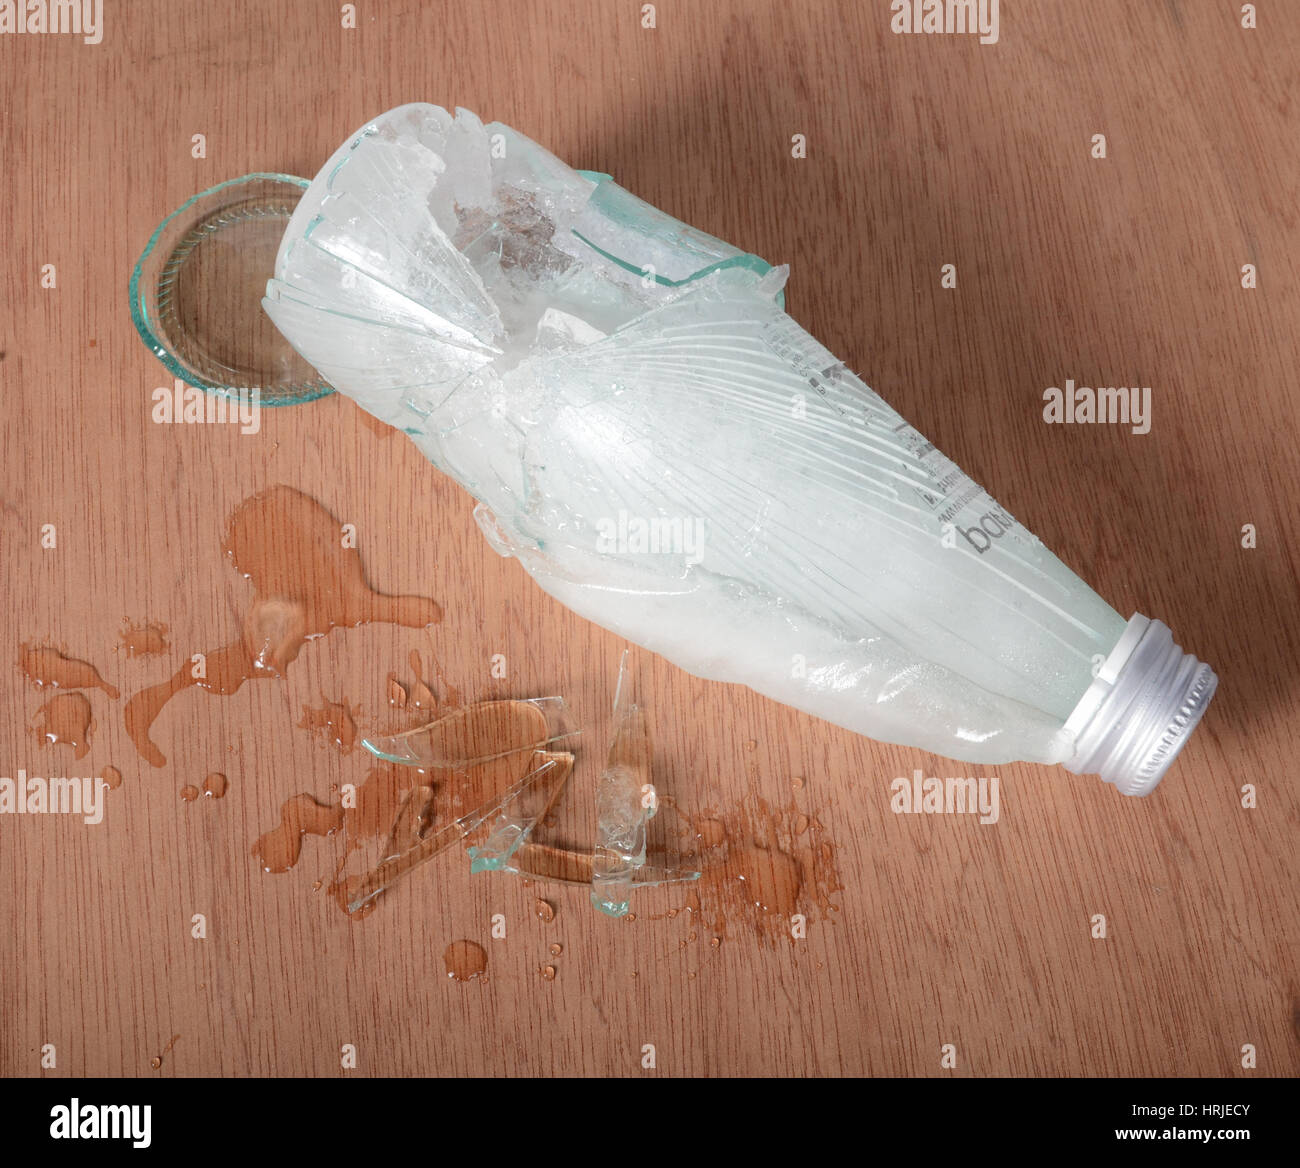 Bottle Broken by Expanding Ice Stock Photo